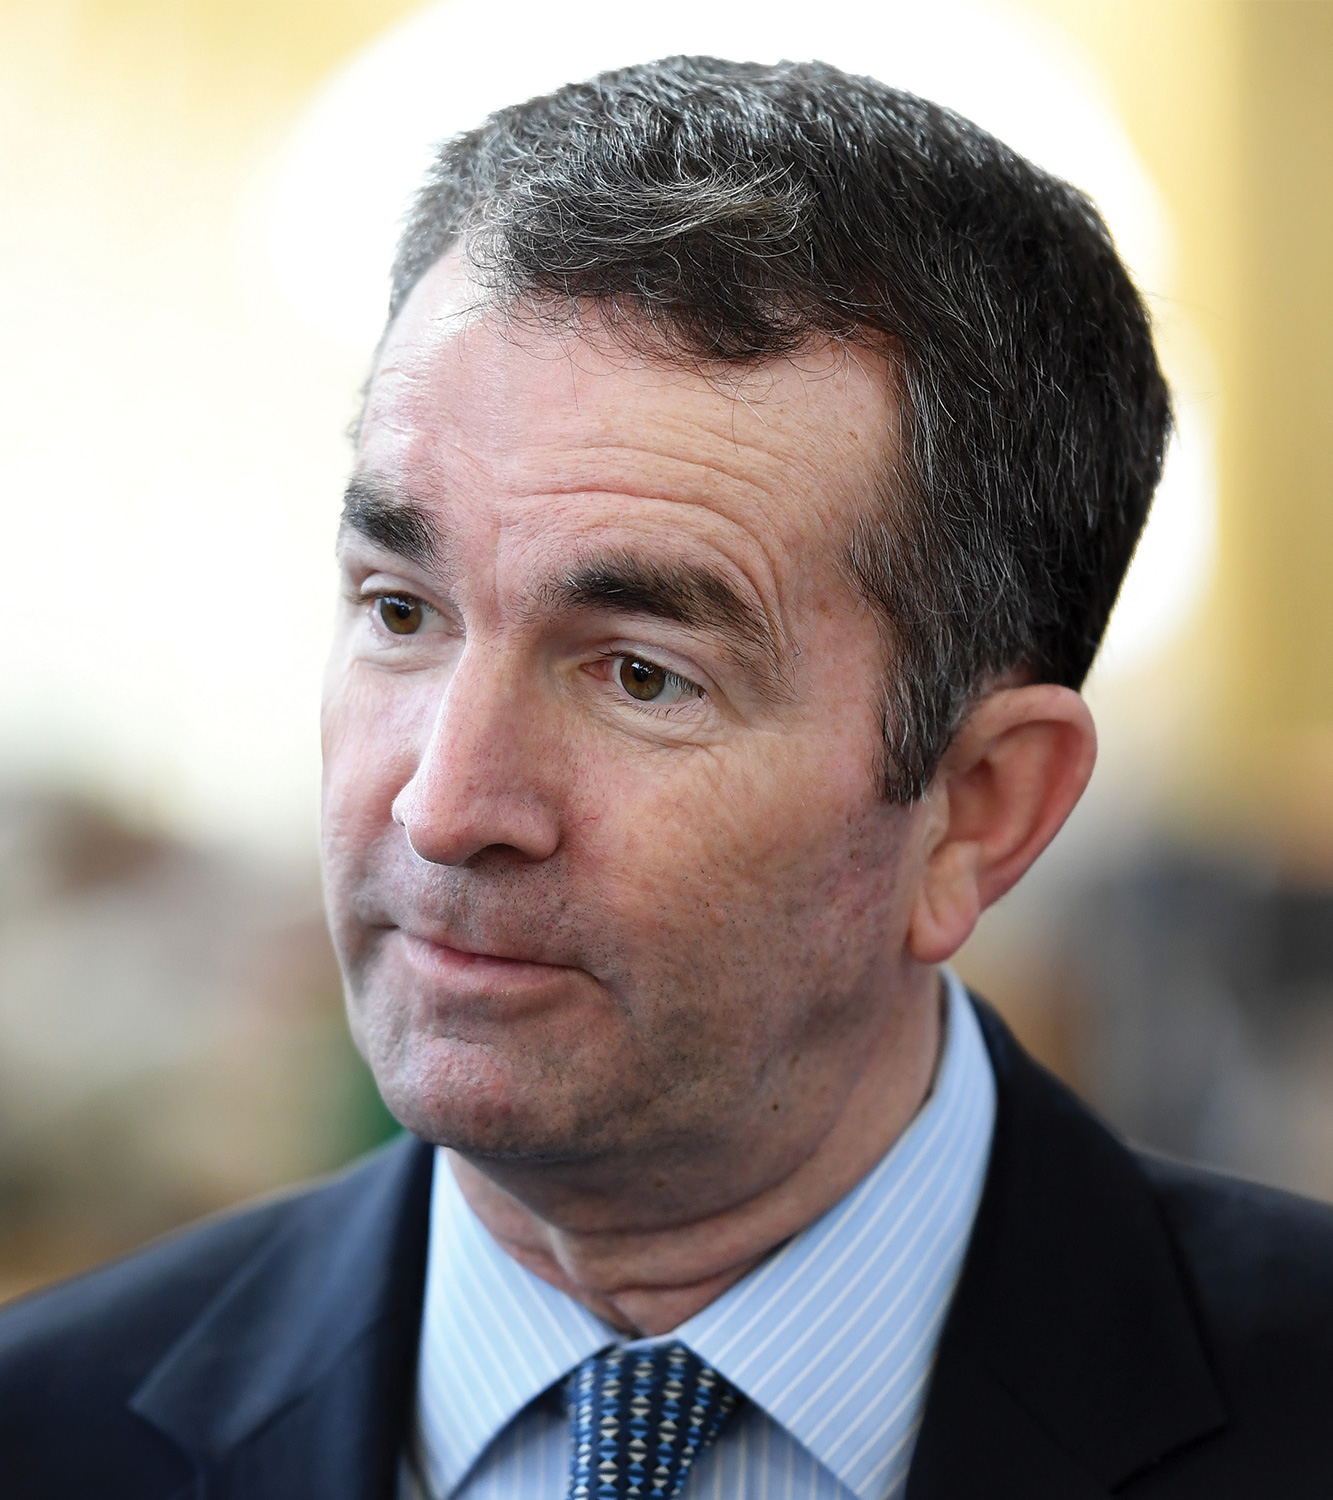 Ralph Northam abandoned compassion with his abortion law